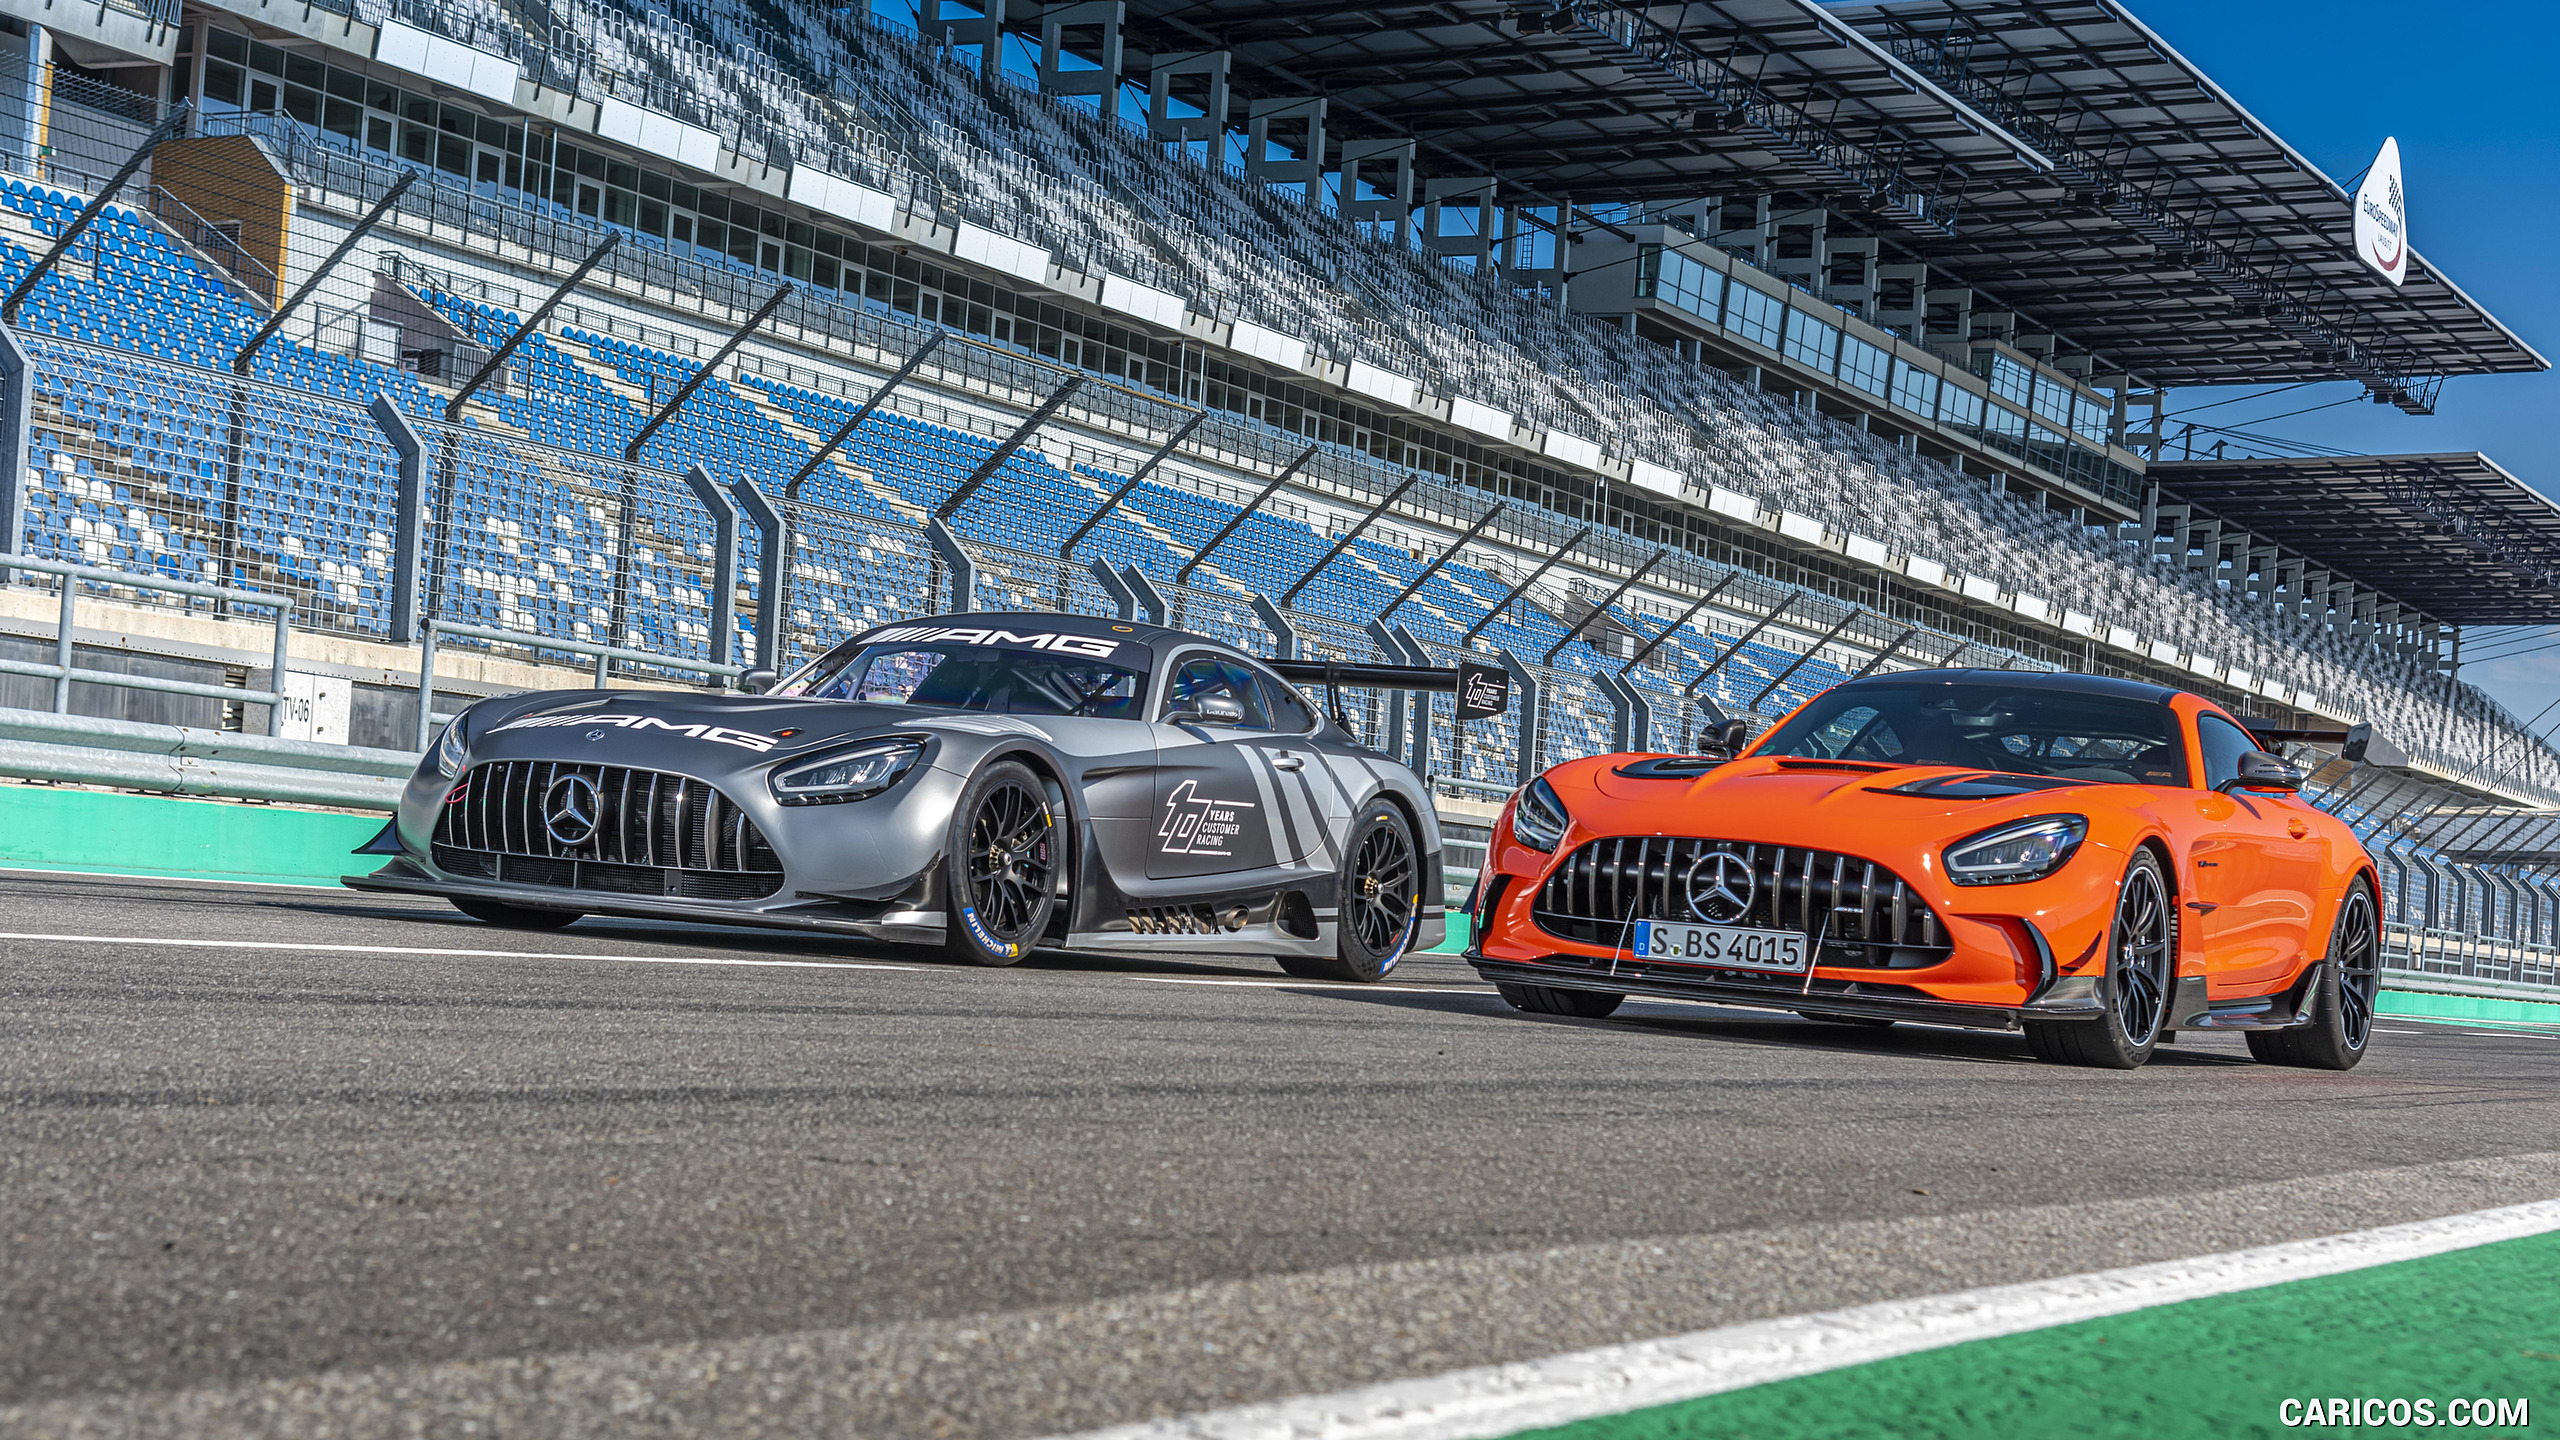 2021 Mercedes-AMG GT Black Series (Color: Magma Beam) and AMG GT3 Racing Car, #142 of 215